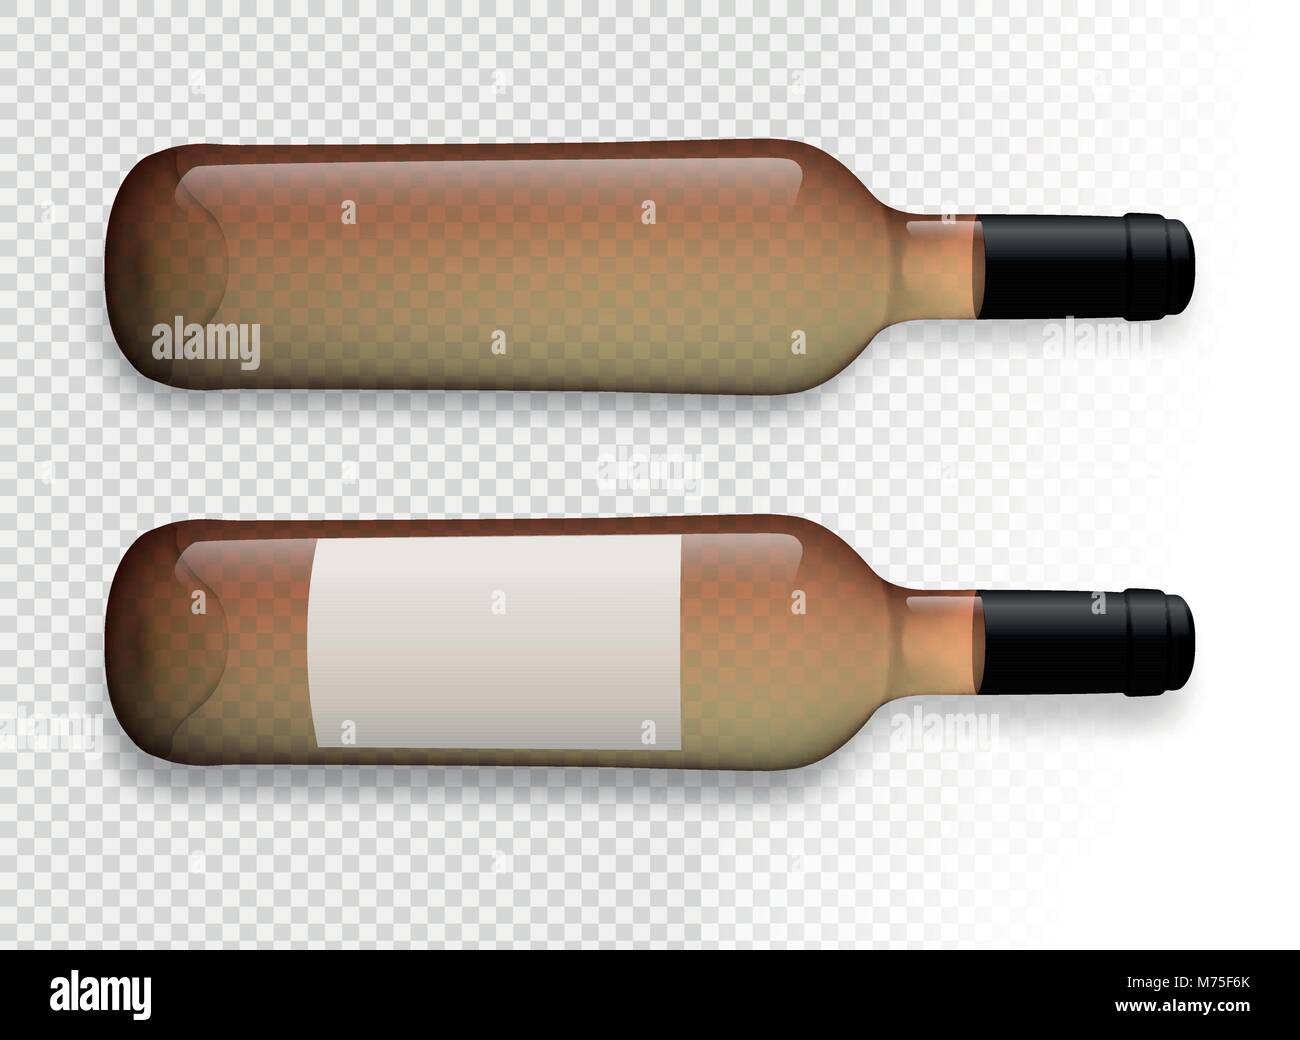 Illustration of salmon rose wine bottles with transparent background. Wine bottle with shadow. Wine bottles with label. Vector drawing isolated. Model Stock Vector